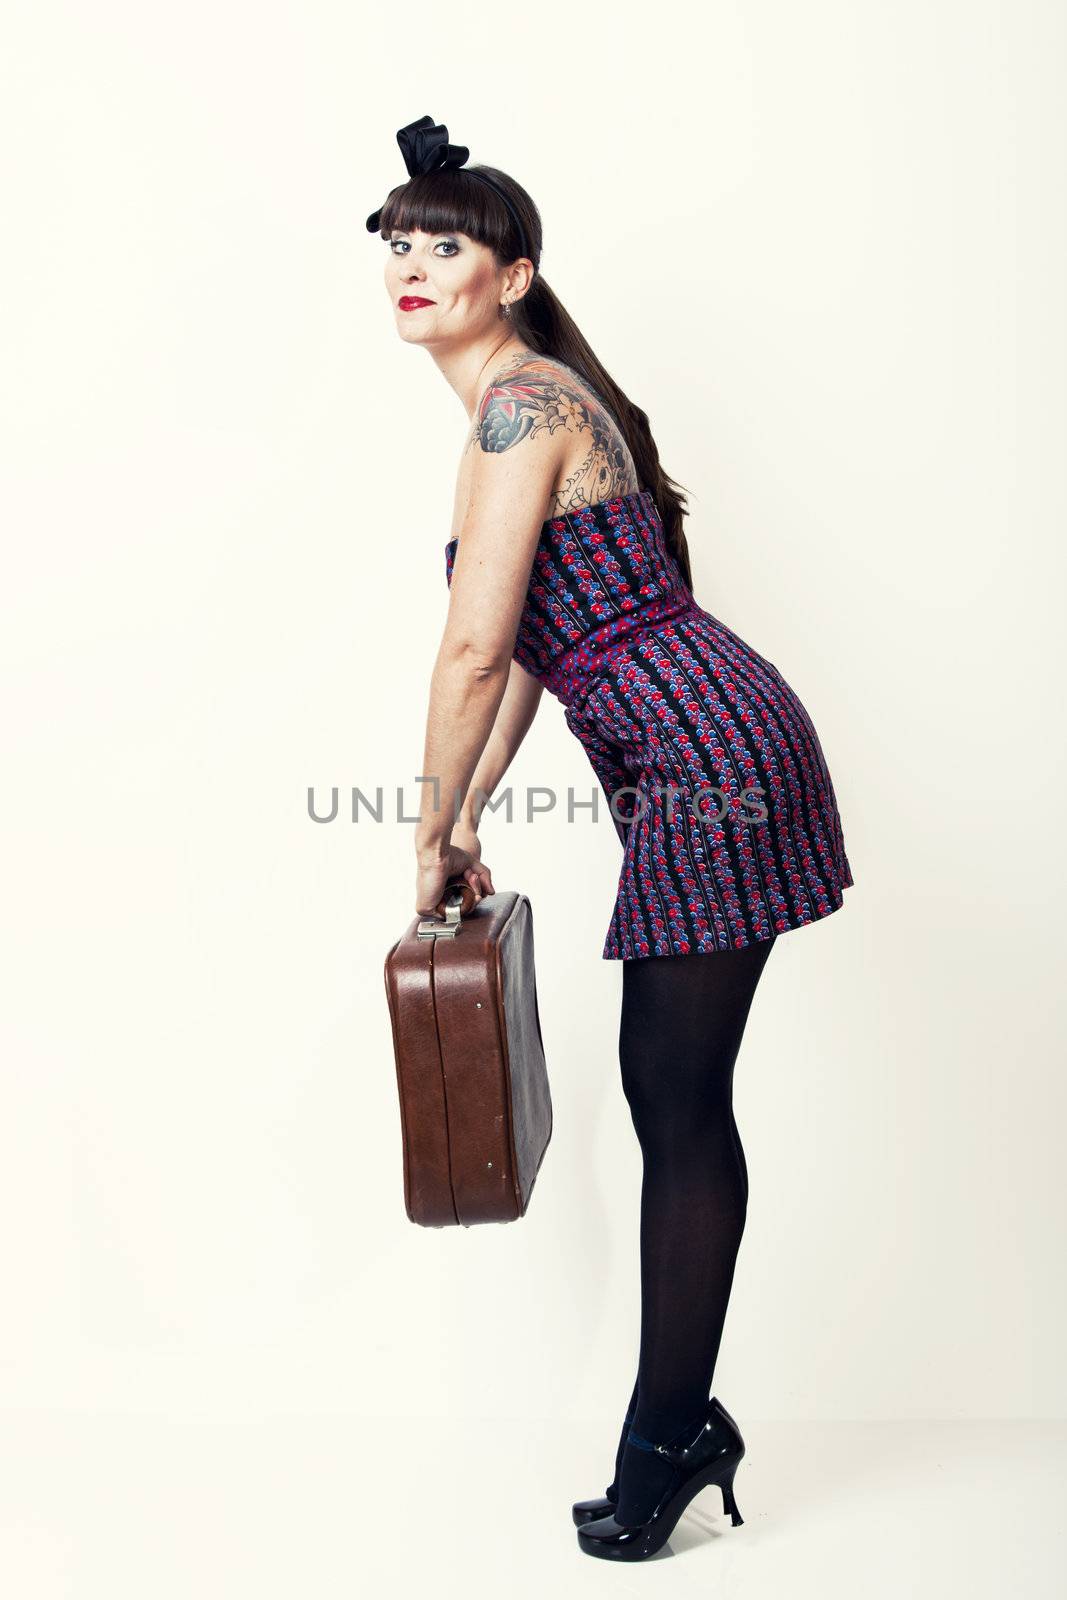 Portrait of a beautiful woman with a vintage look posing with a suitcase